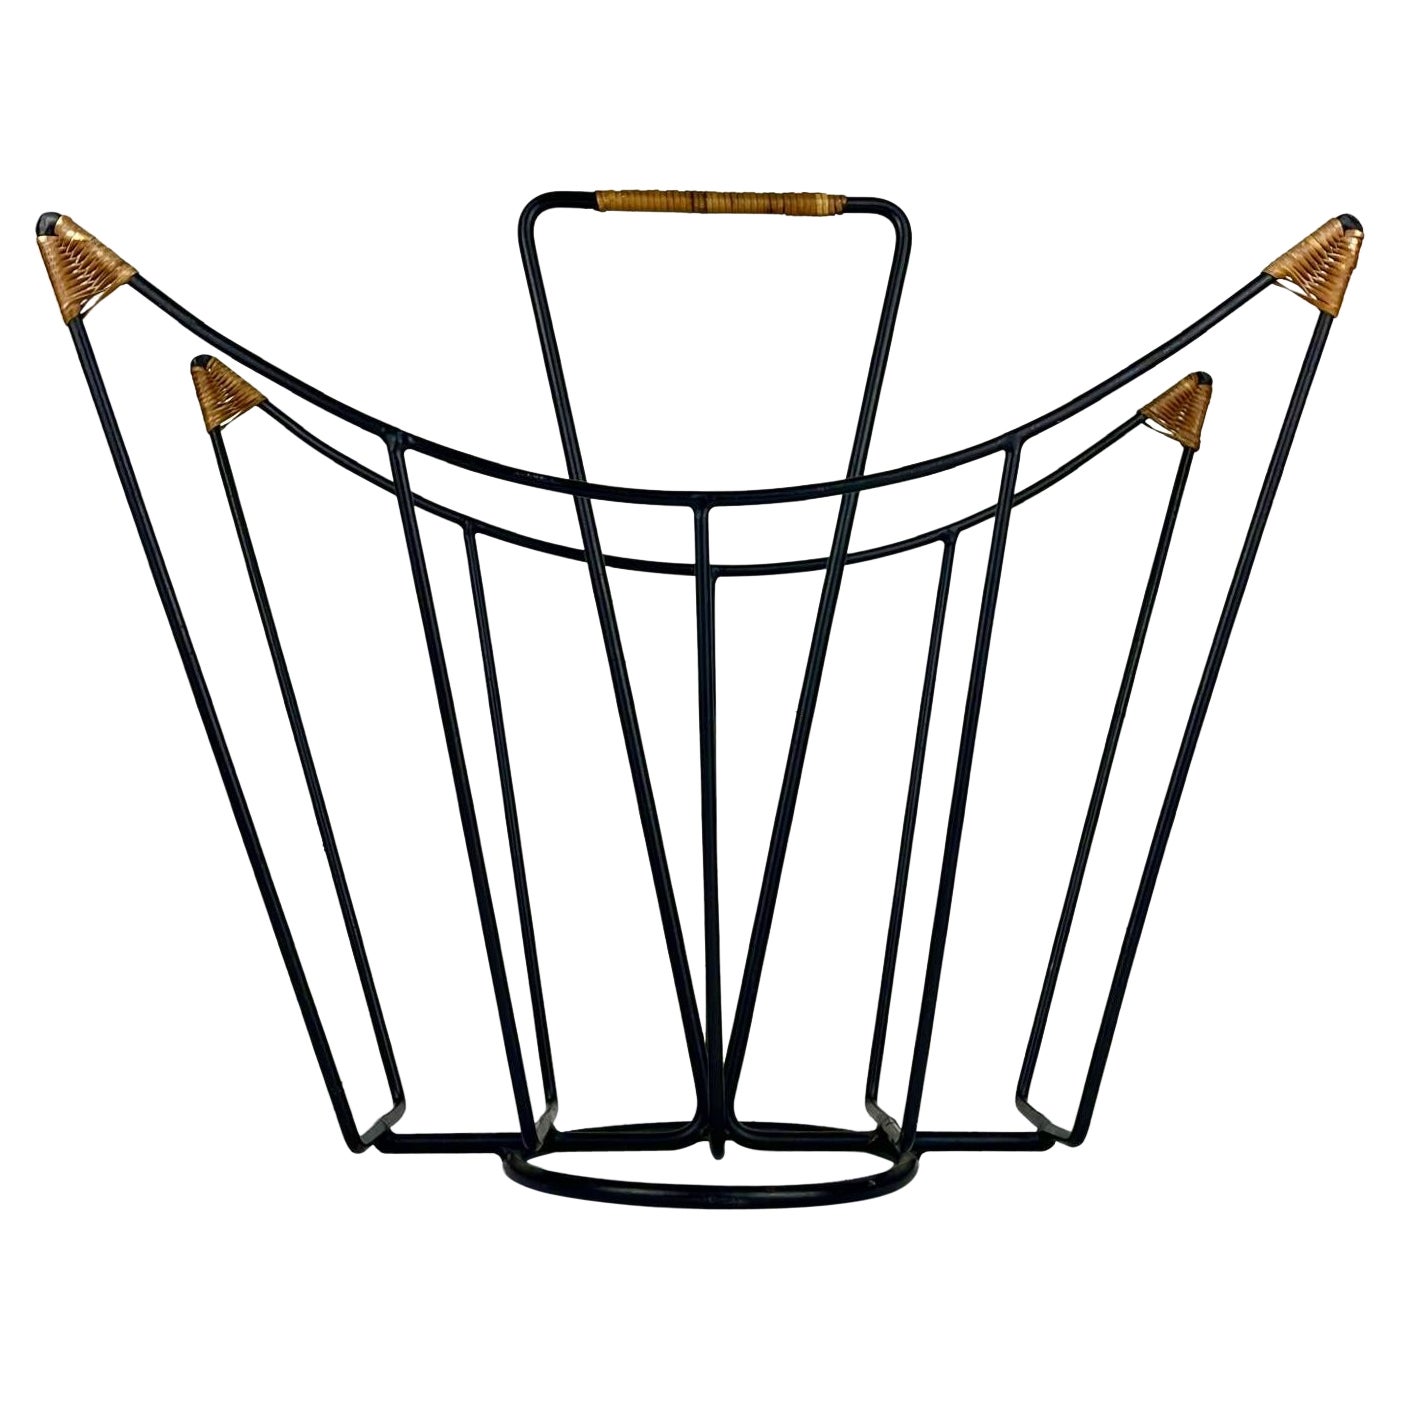 Sculptural 1950s metal magazine rack with twisted rattan details Laurids Lonborg